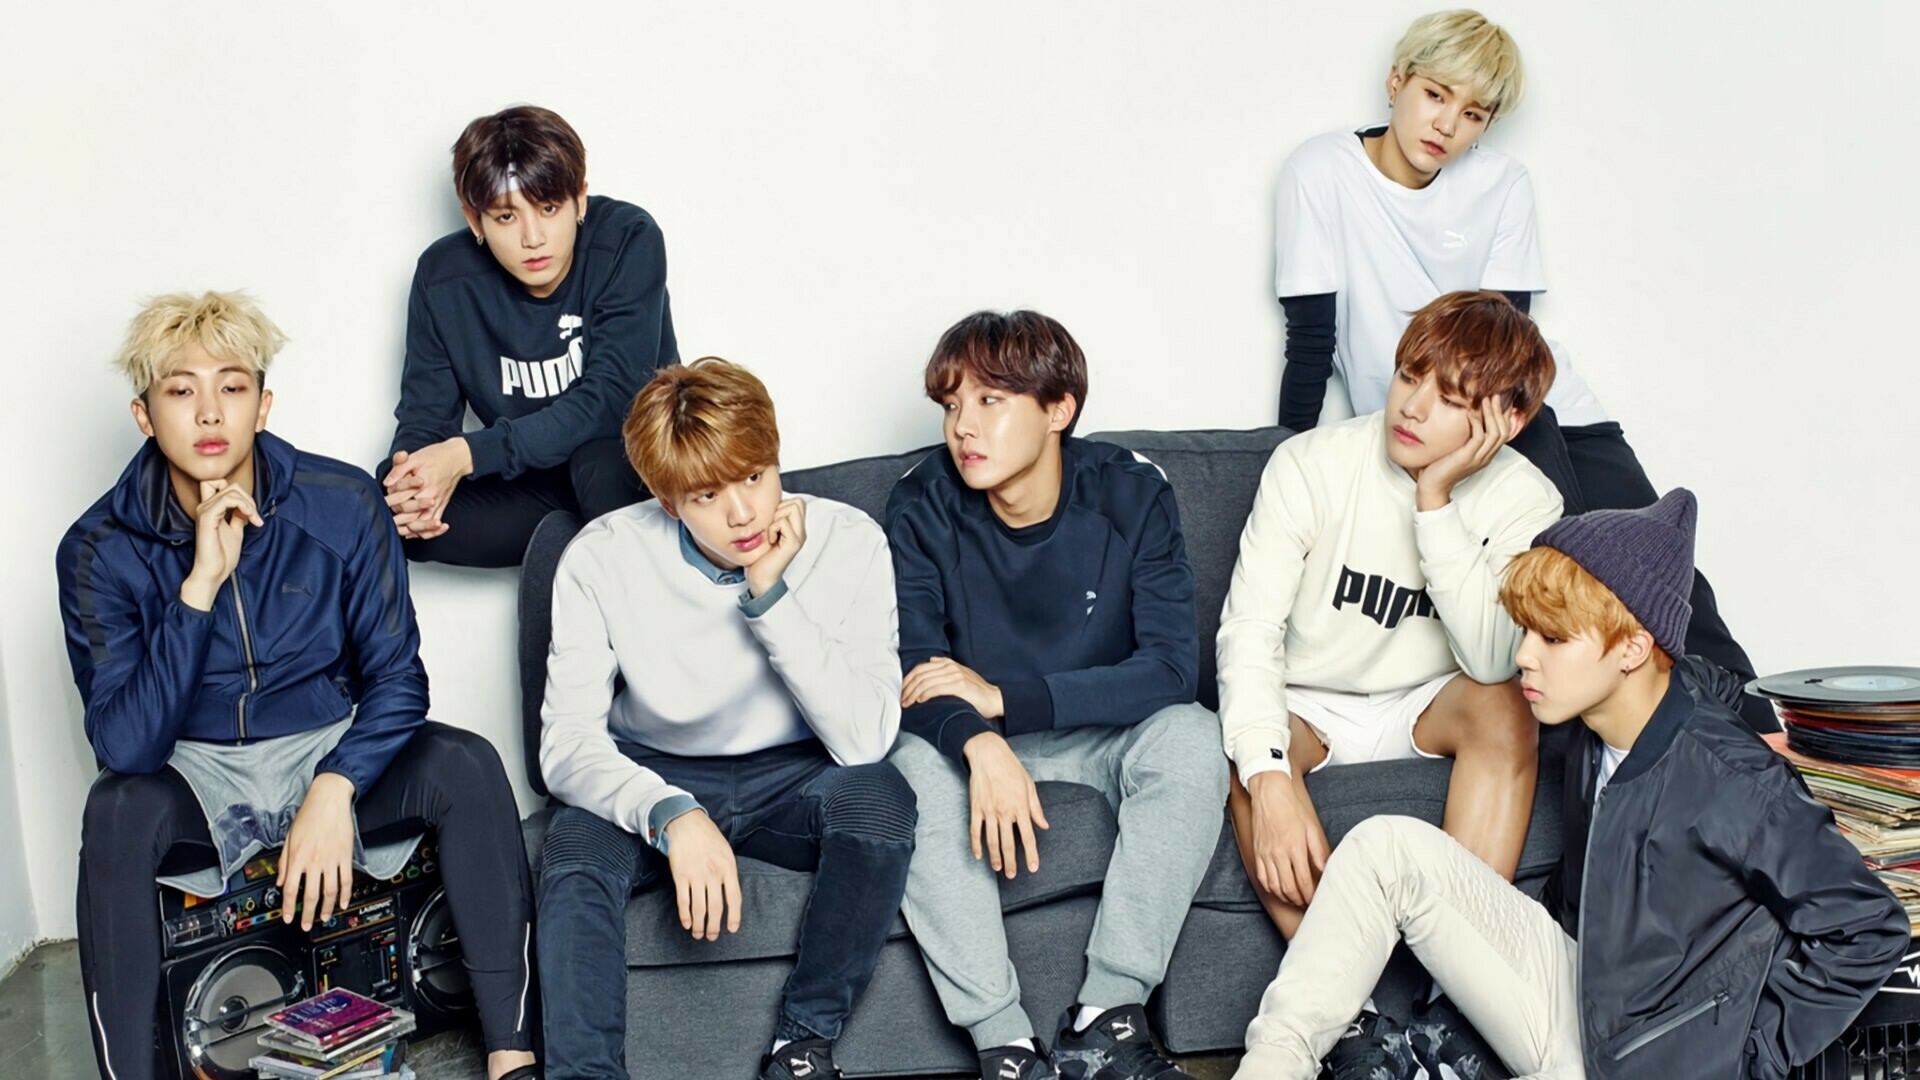 K-Pop: BTS, released their first studio albums, Dark & Wild and Wake Up in 2014. 1920x1080 Full HD Wallpaper.